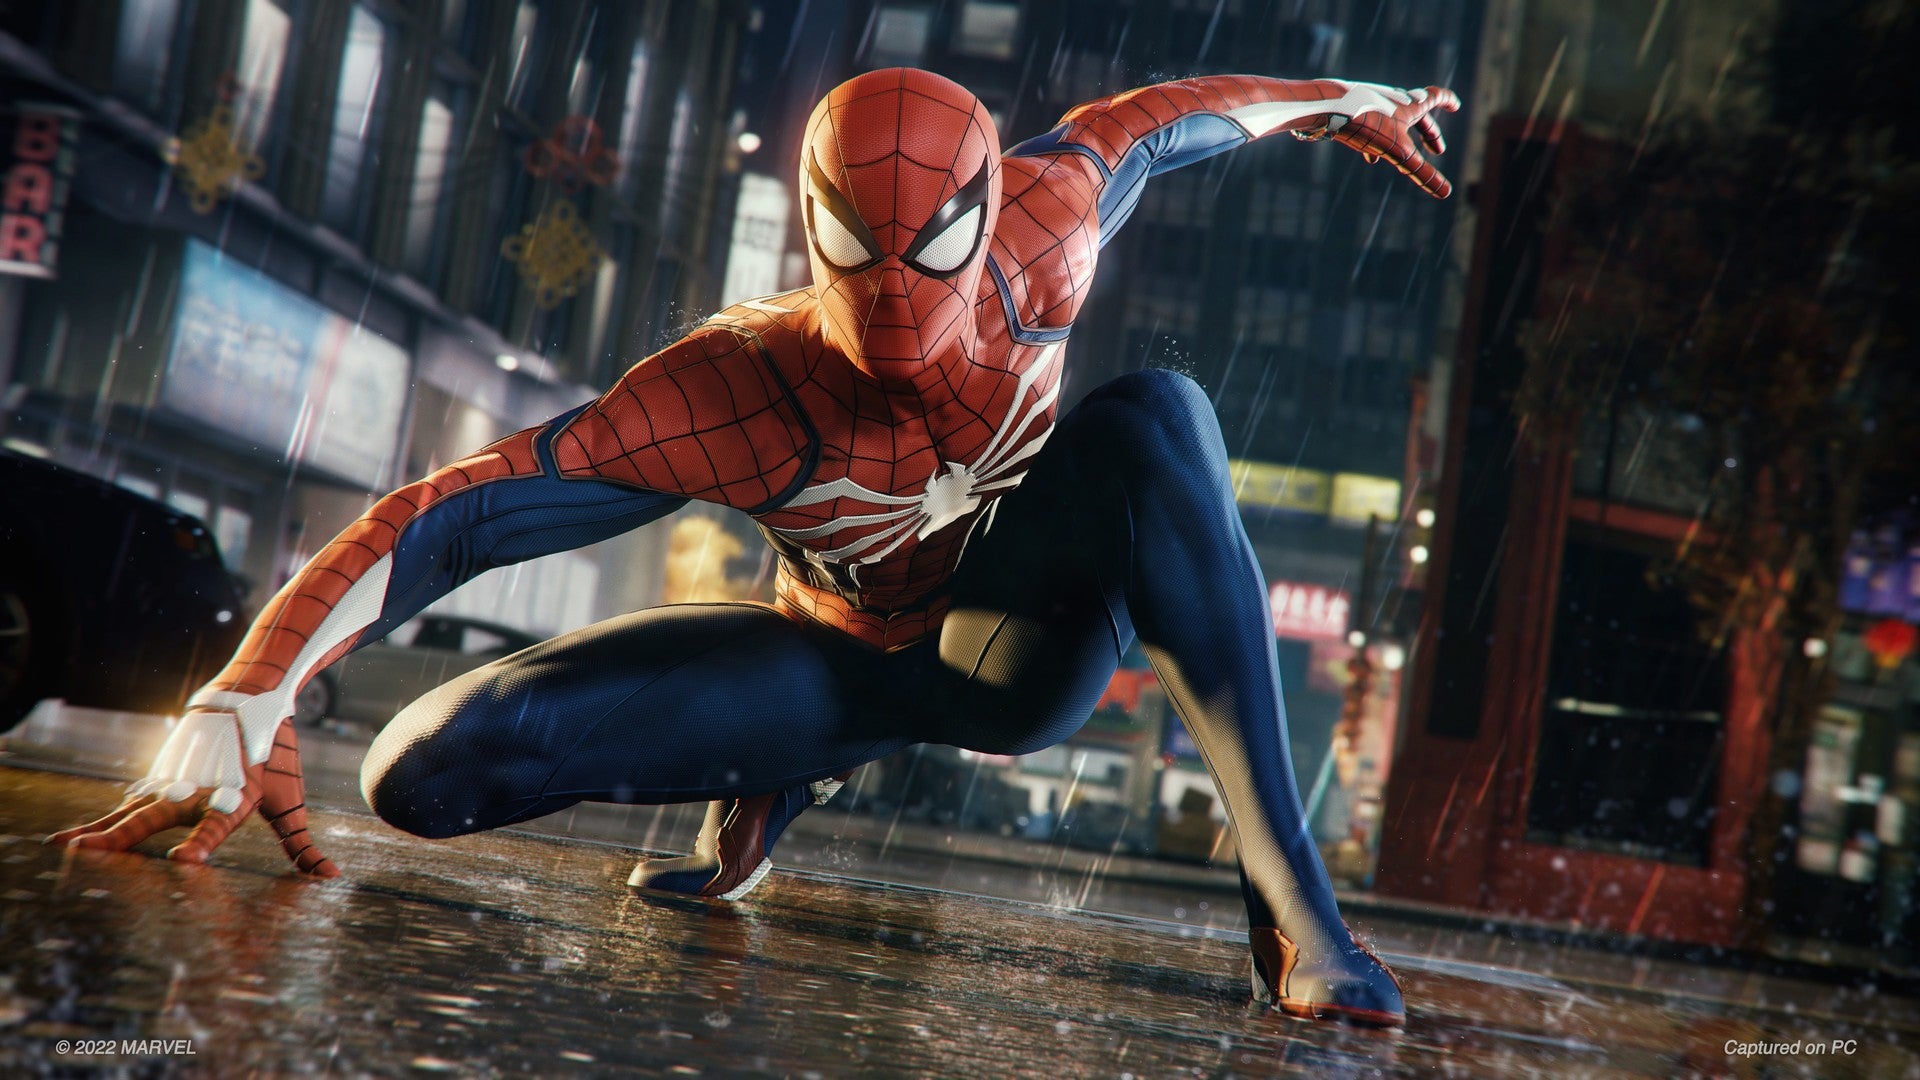 Marvel's Spider-Man is coming to PC on August 12th.